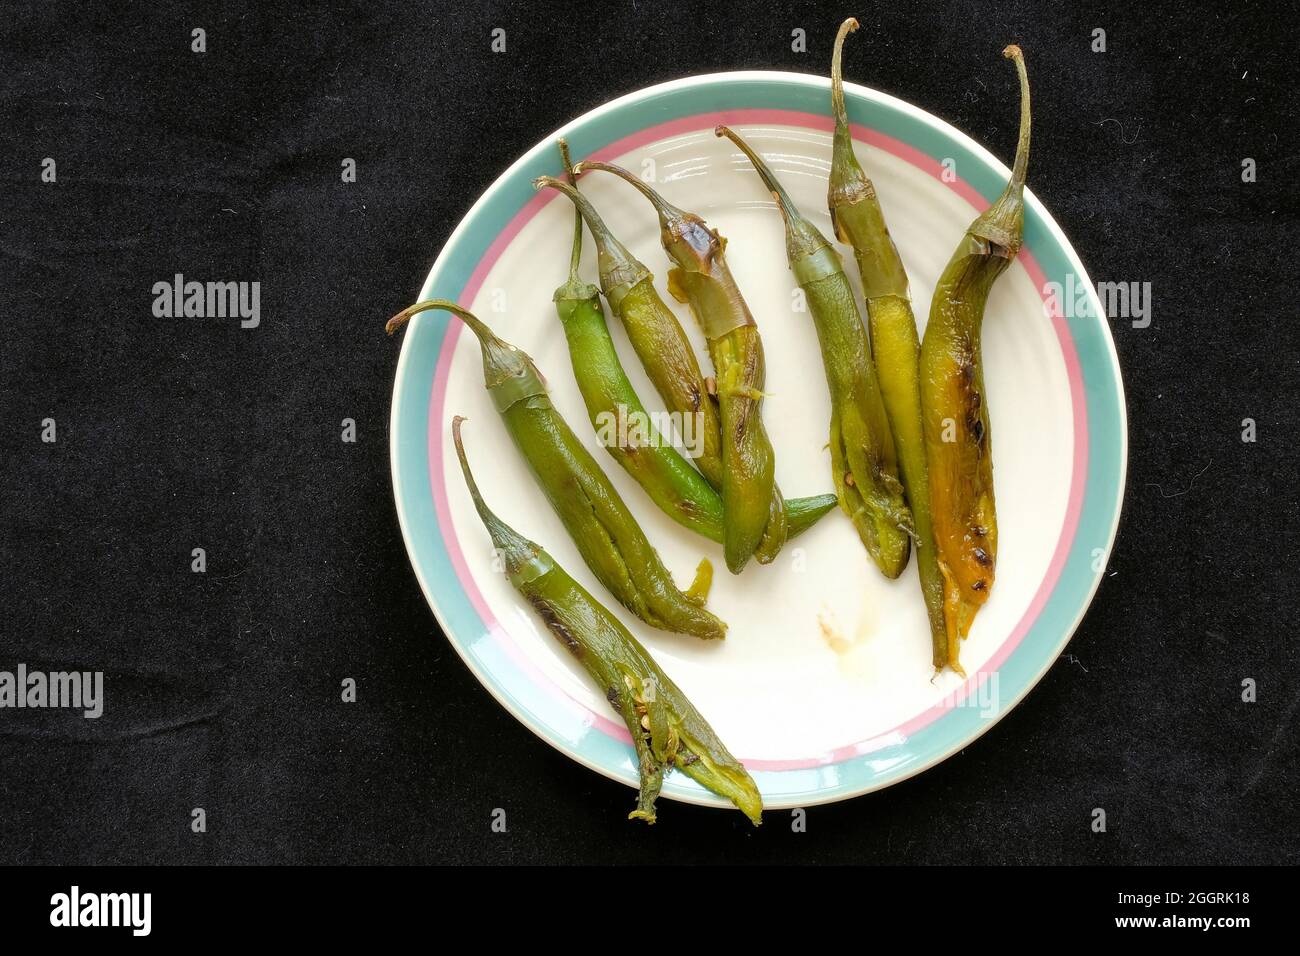 https://c8.alamy.com/comp/2GGRK18/roasted-and-peeled-serrano-peppers-with-stems-on-a-ceramic-plate-ready-for-homemade-salsa-and-an-ingredient-for-spicy-mexican-food-2GGRK18.jpg